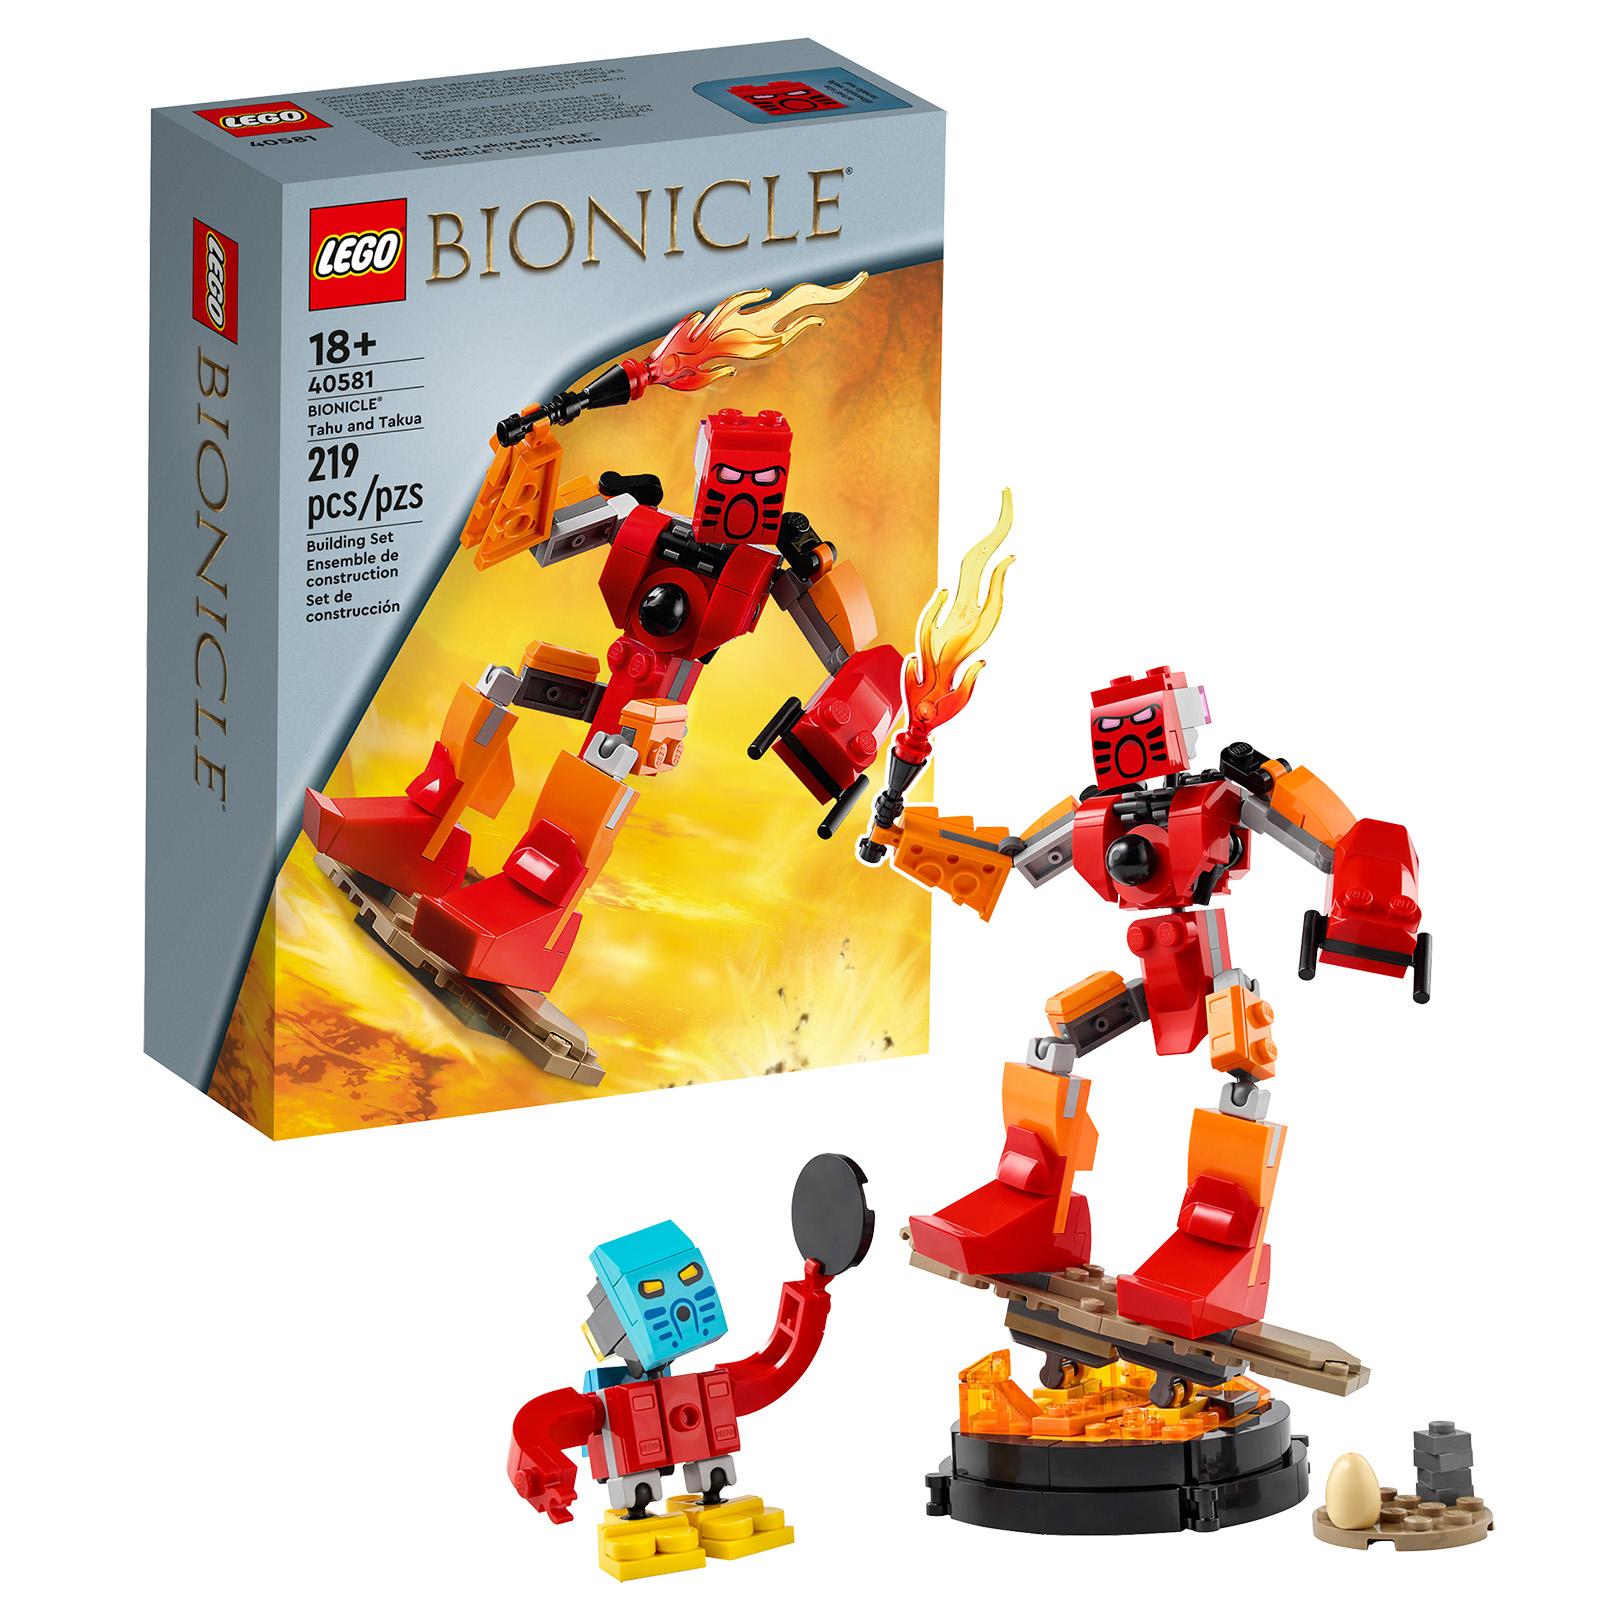 LEGO 40581 BIONICLE Tahu and Takua: the promotional set is online on the Shop